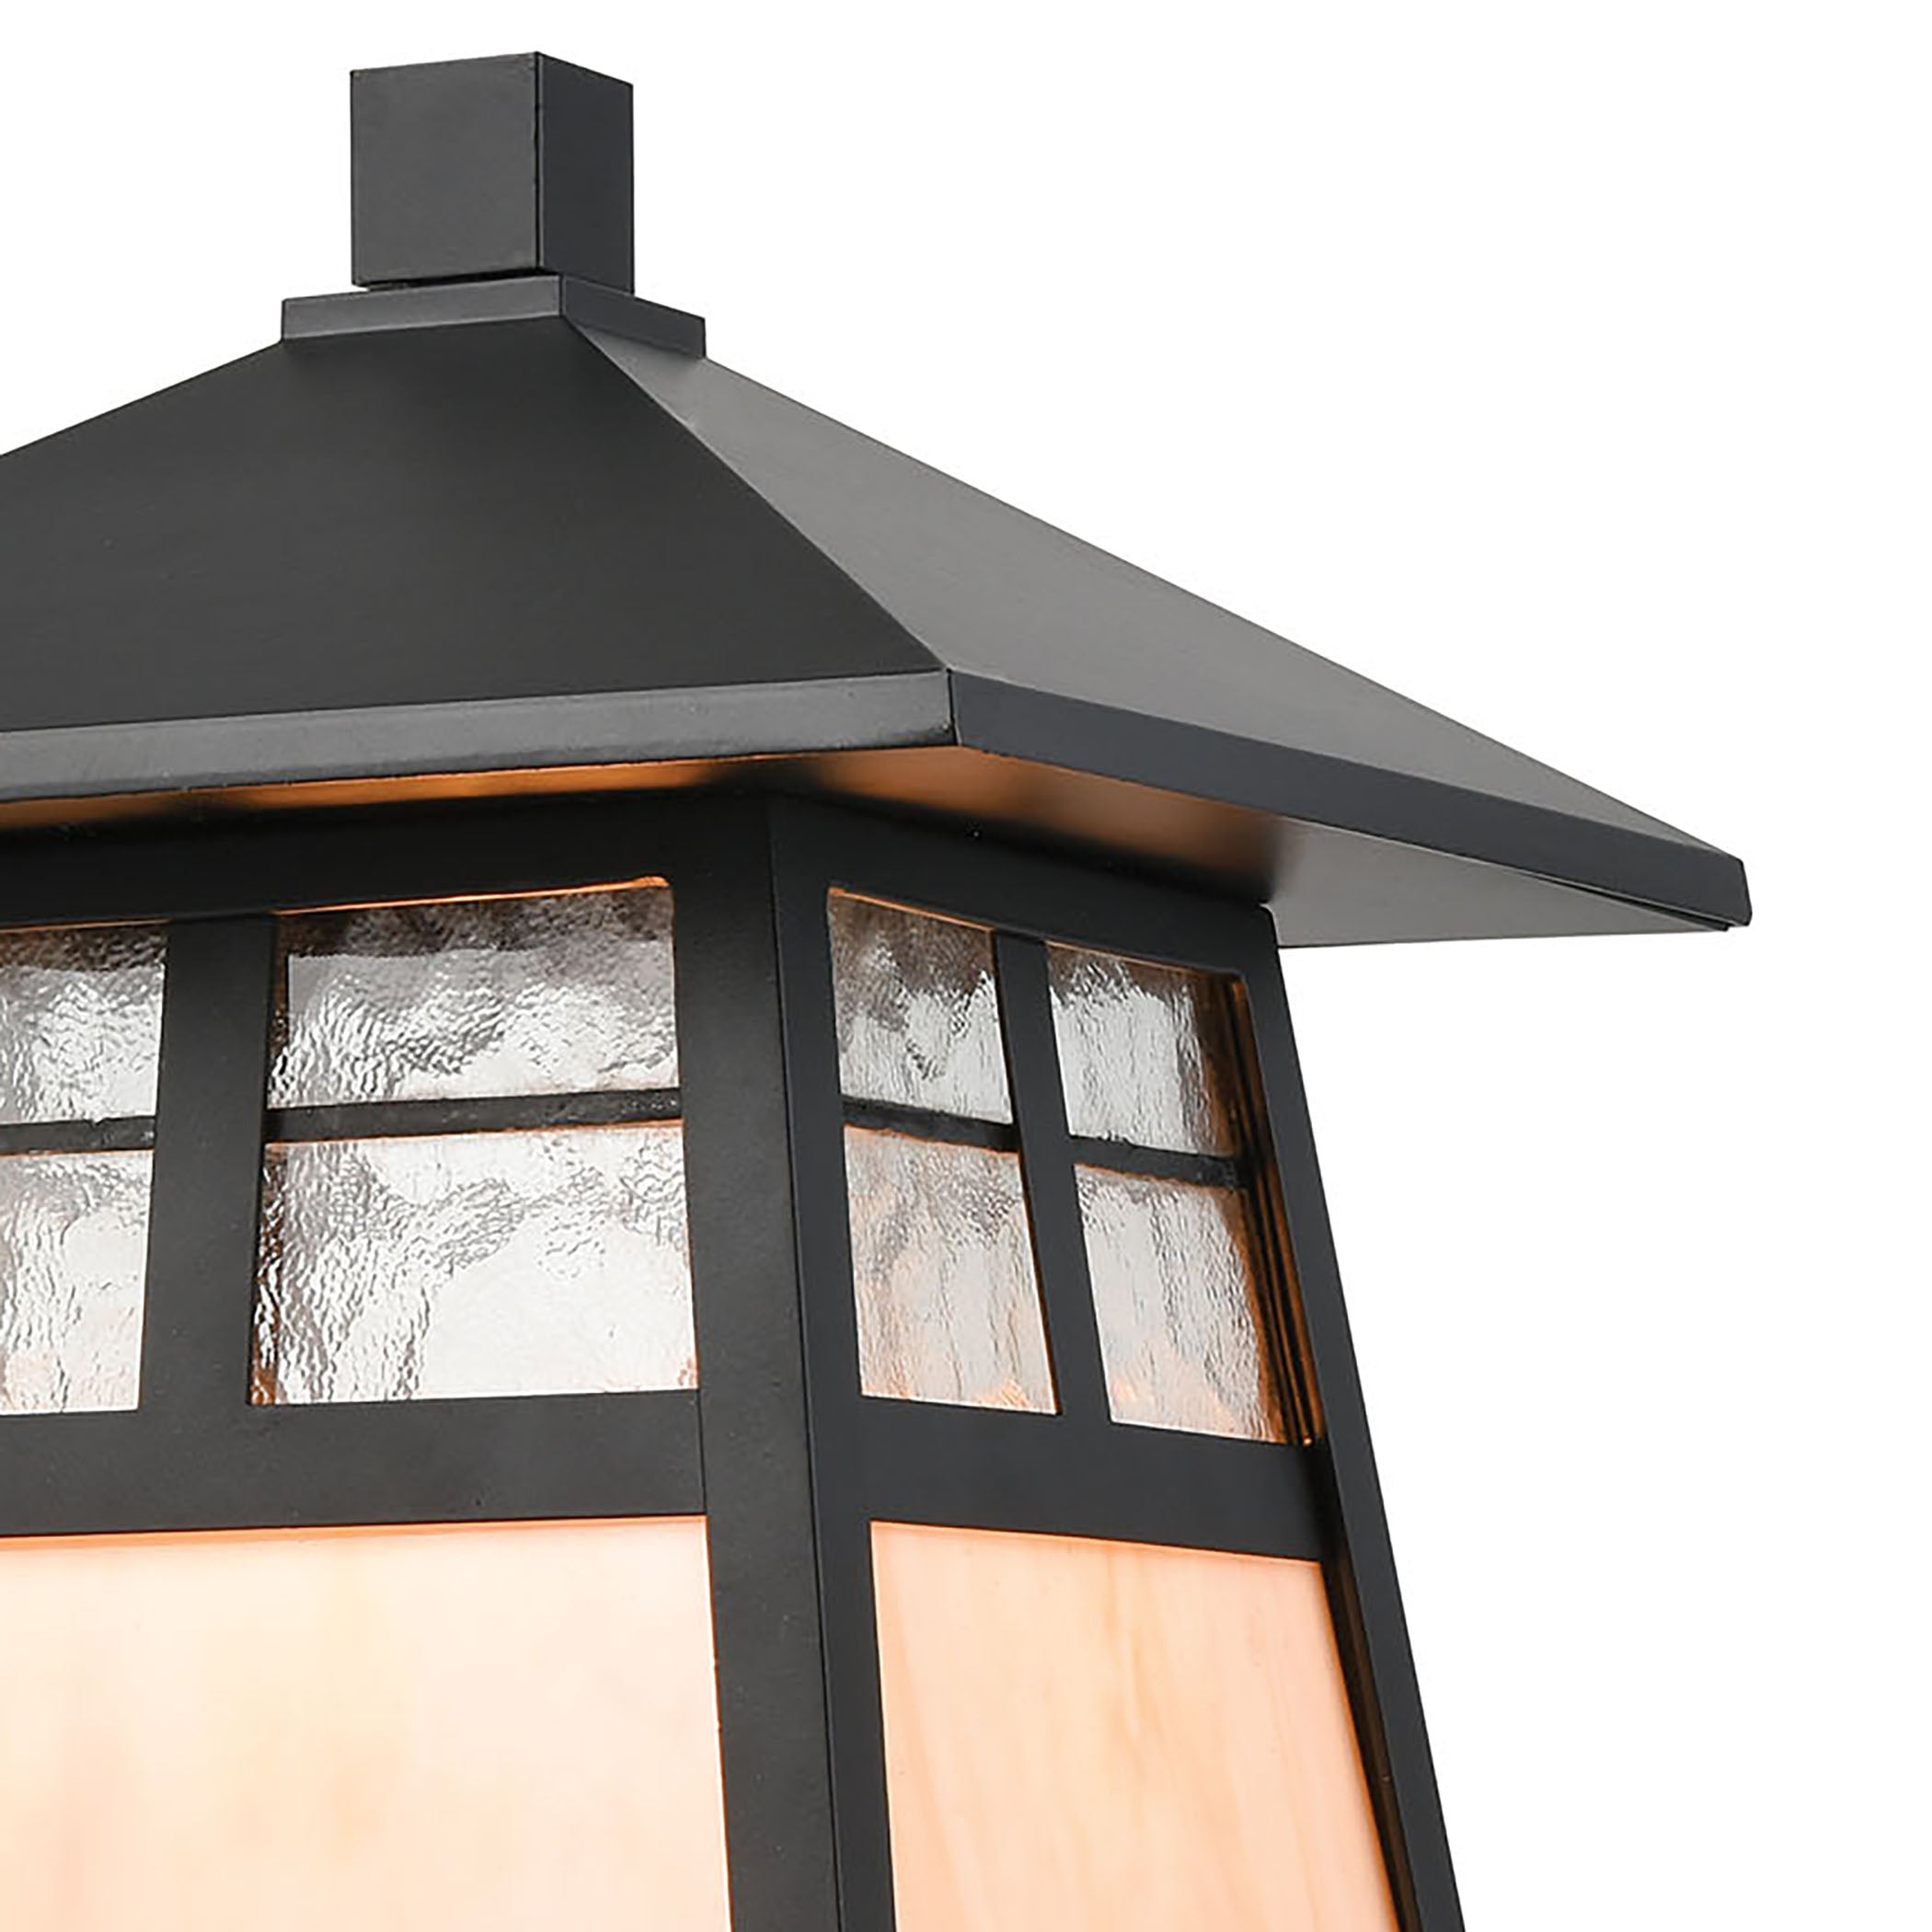 ELK Lighting 87054/1 Cottage 1-Light Post Mount in Matte Black with Antique White Art Glass and Clear Textured Glass